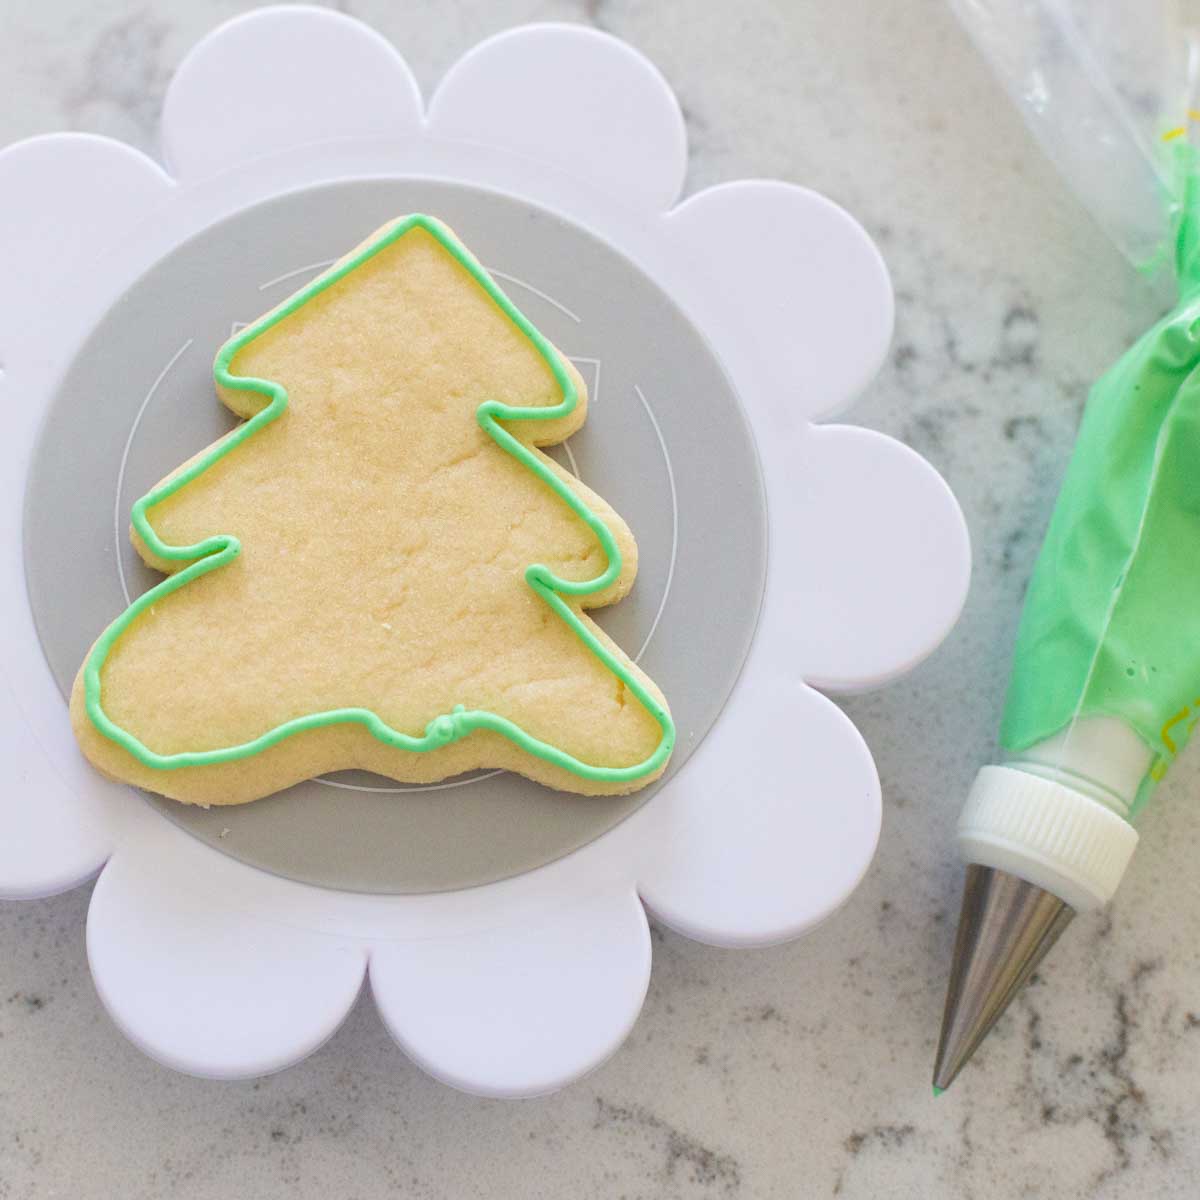 How to Decorate Cookies with Royal Icing - Peanut Blossom